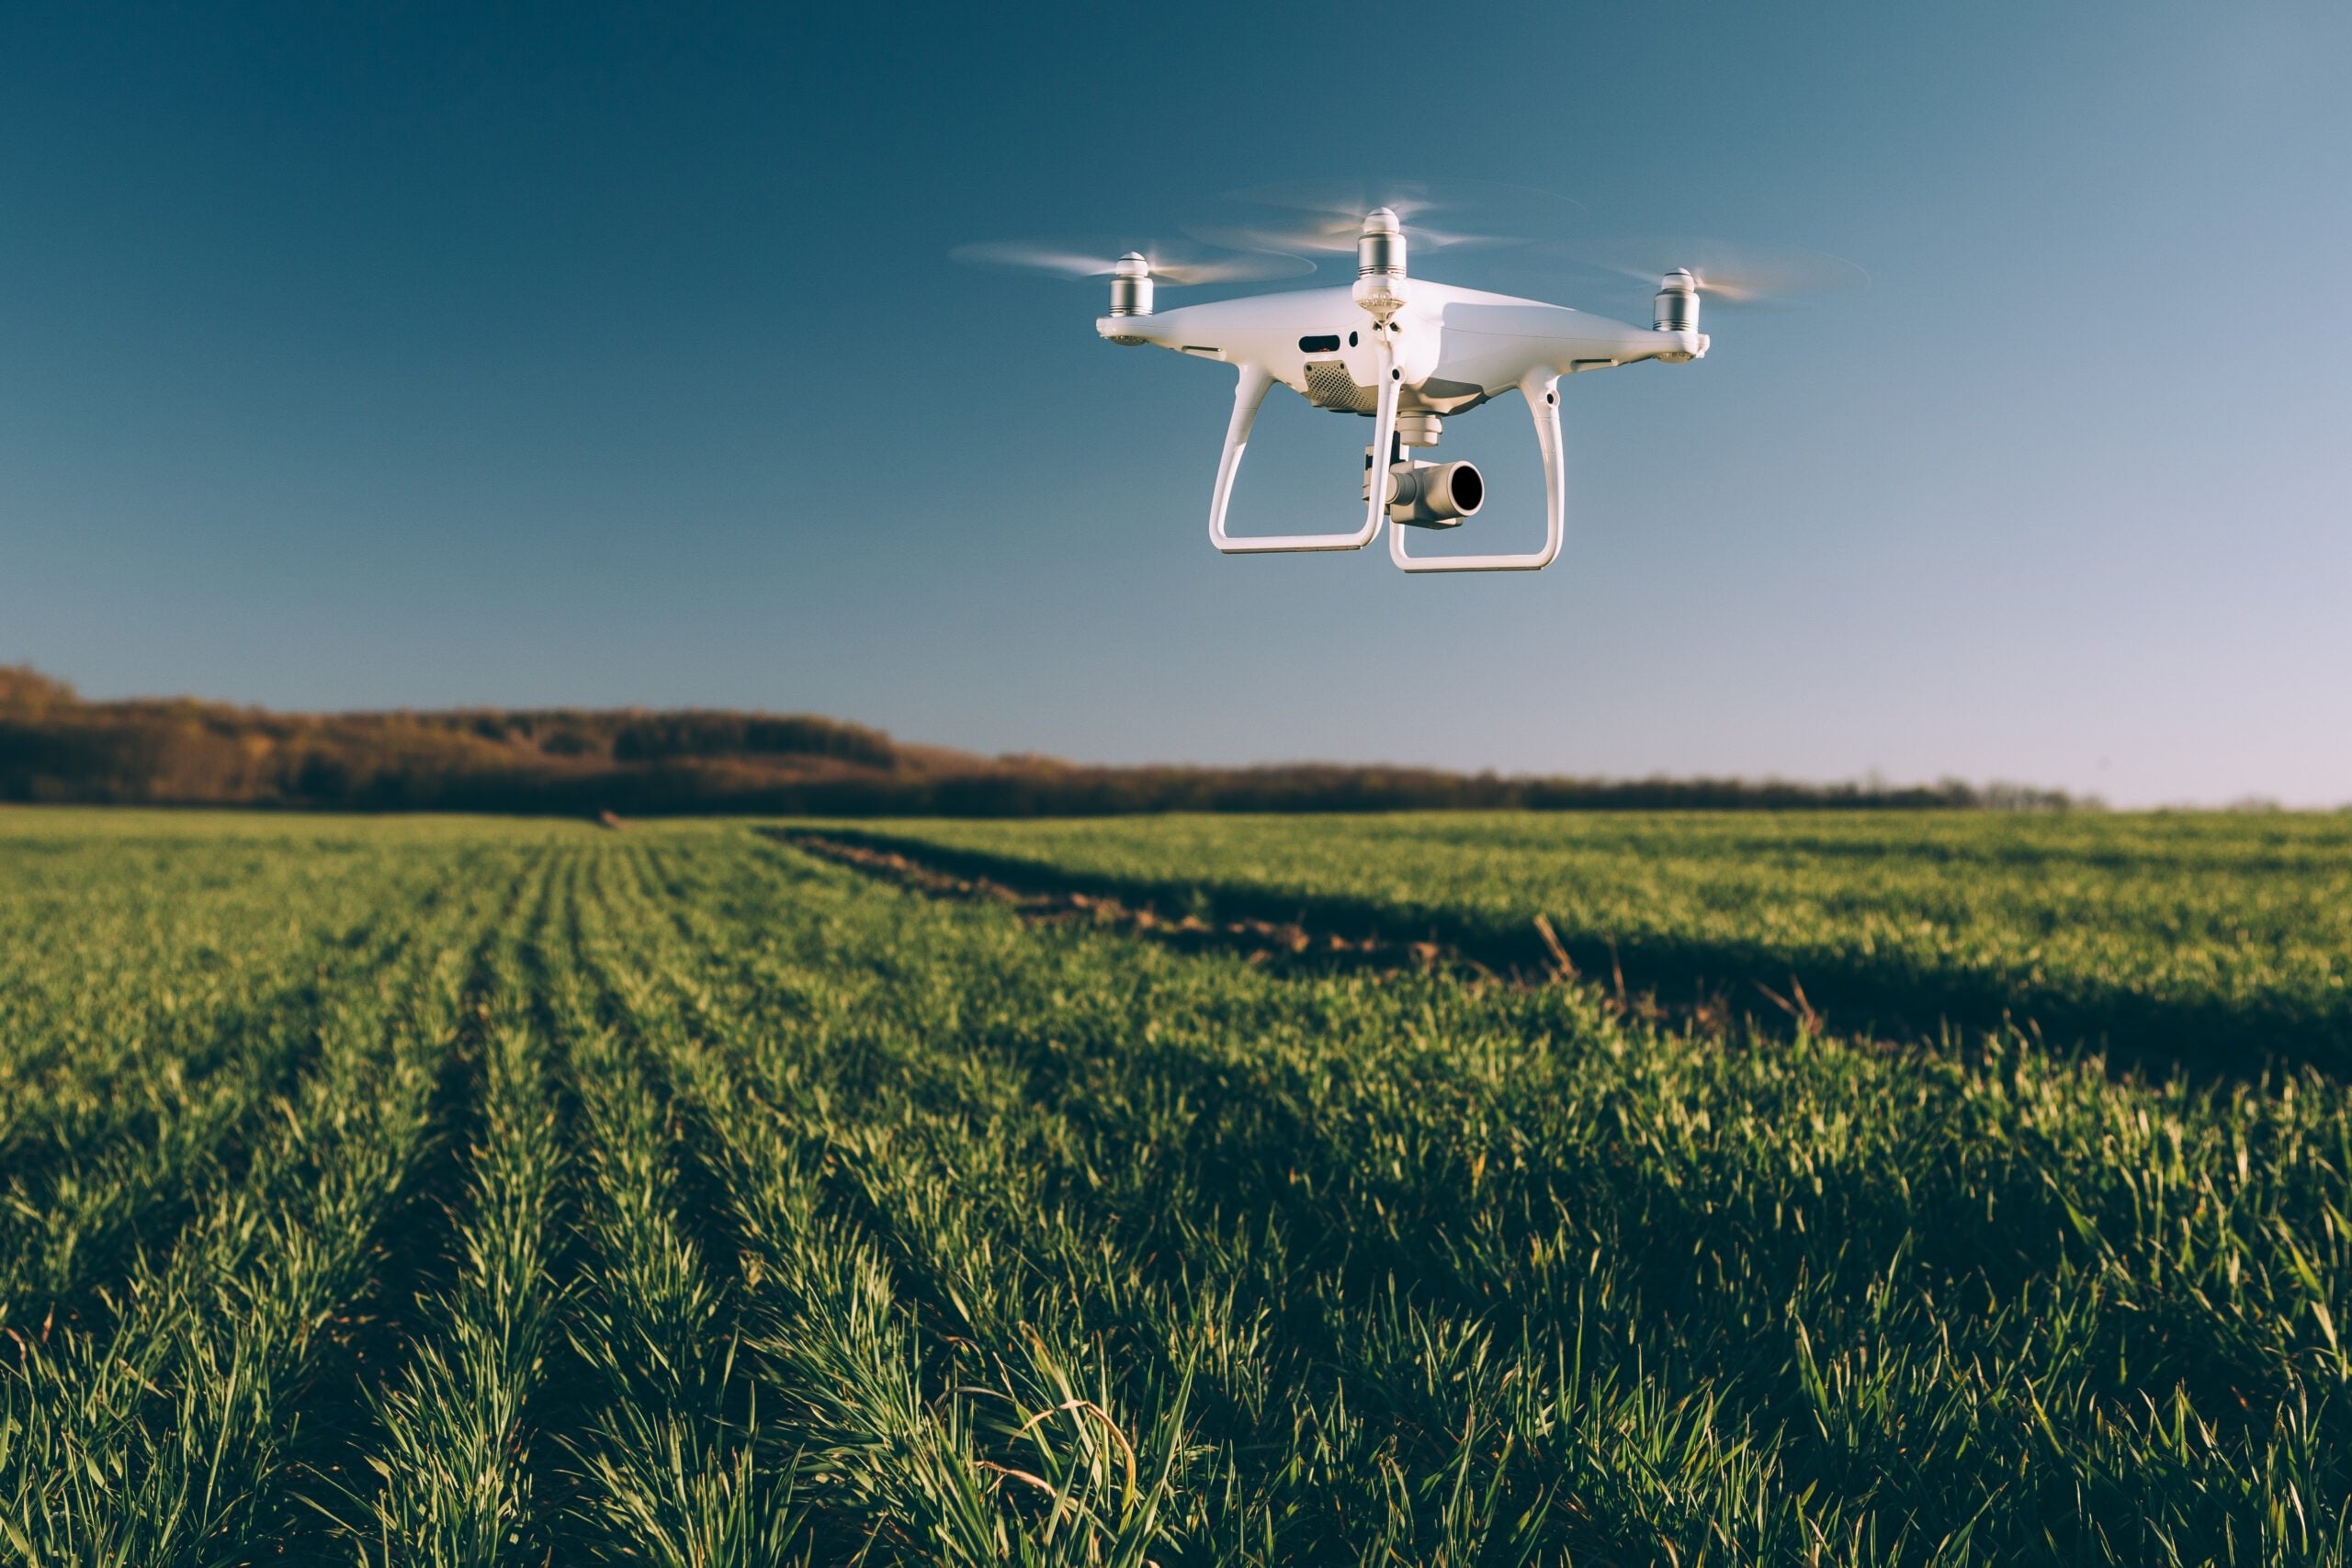 California To Deploy Drones To Fight Illegal Cannabis Farms - Marijuana Packaging